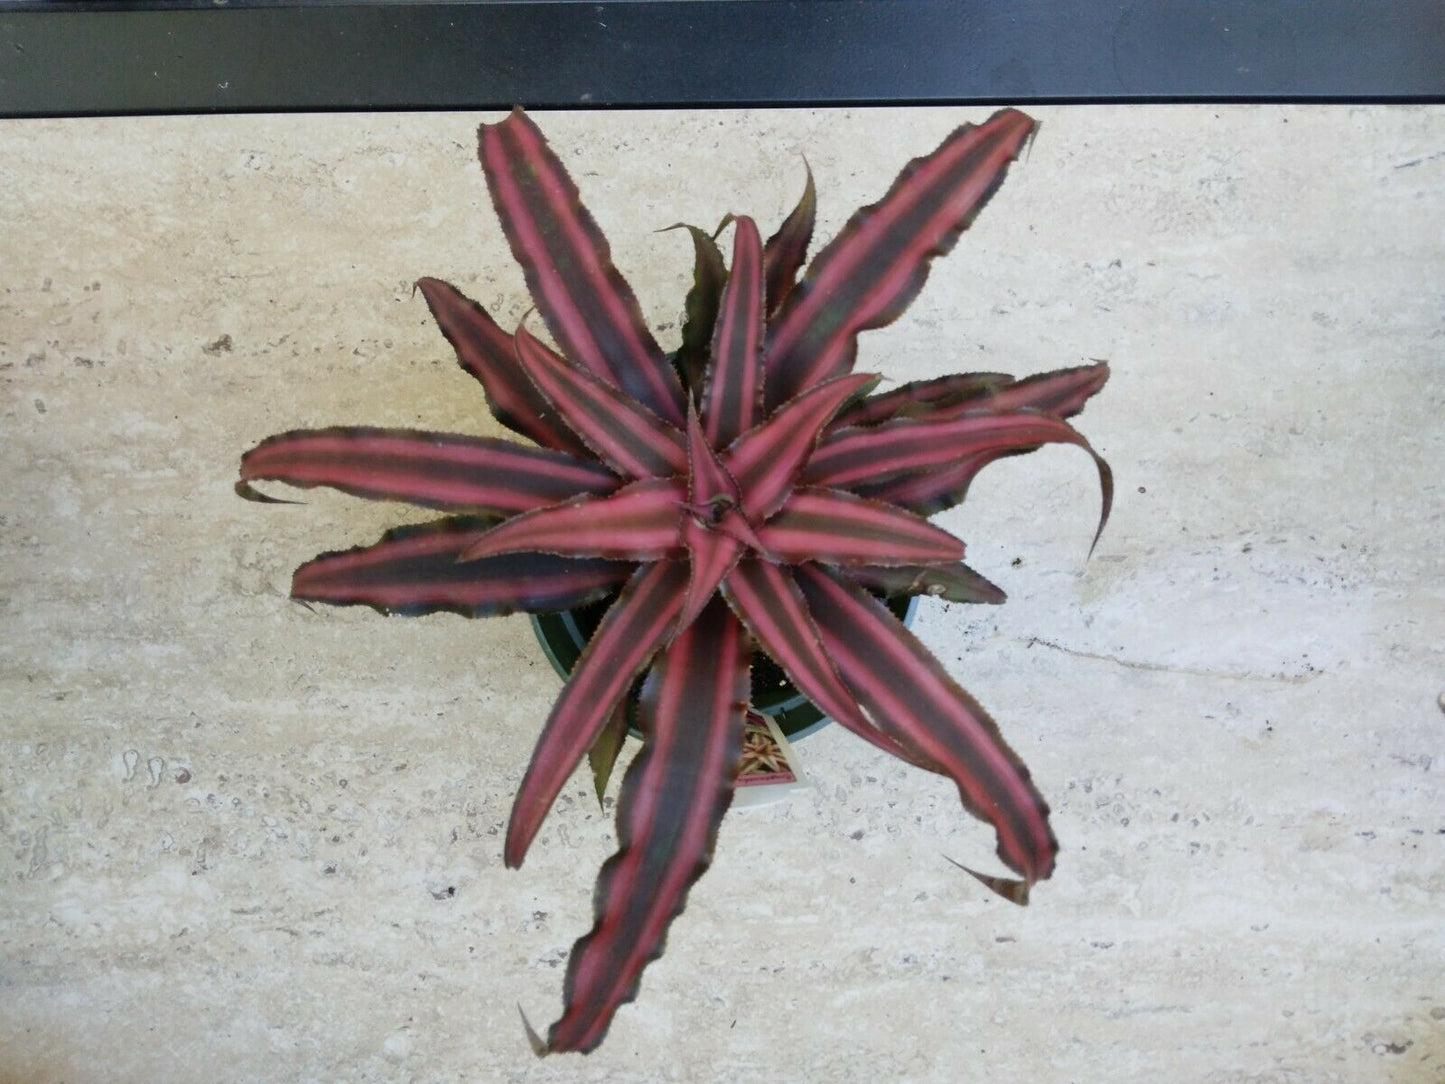 Bromeliad Cryptanthus Ruby Exotic Tropical Plant